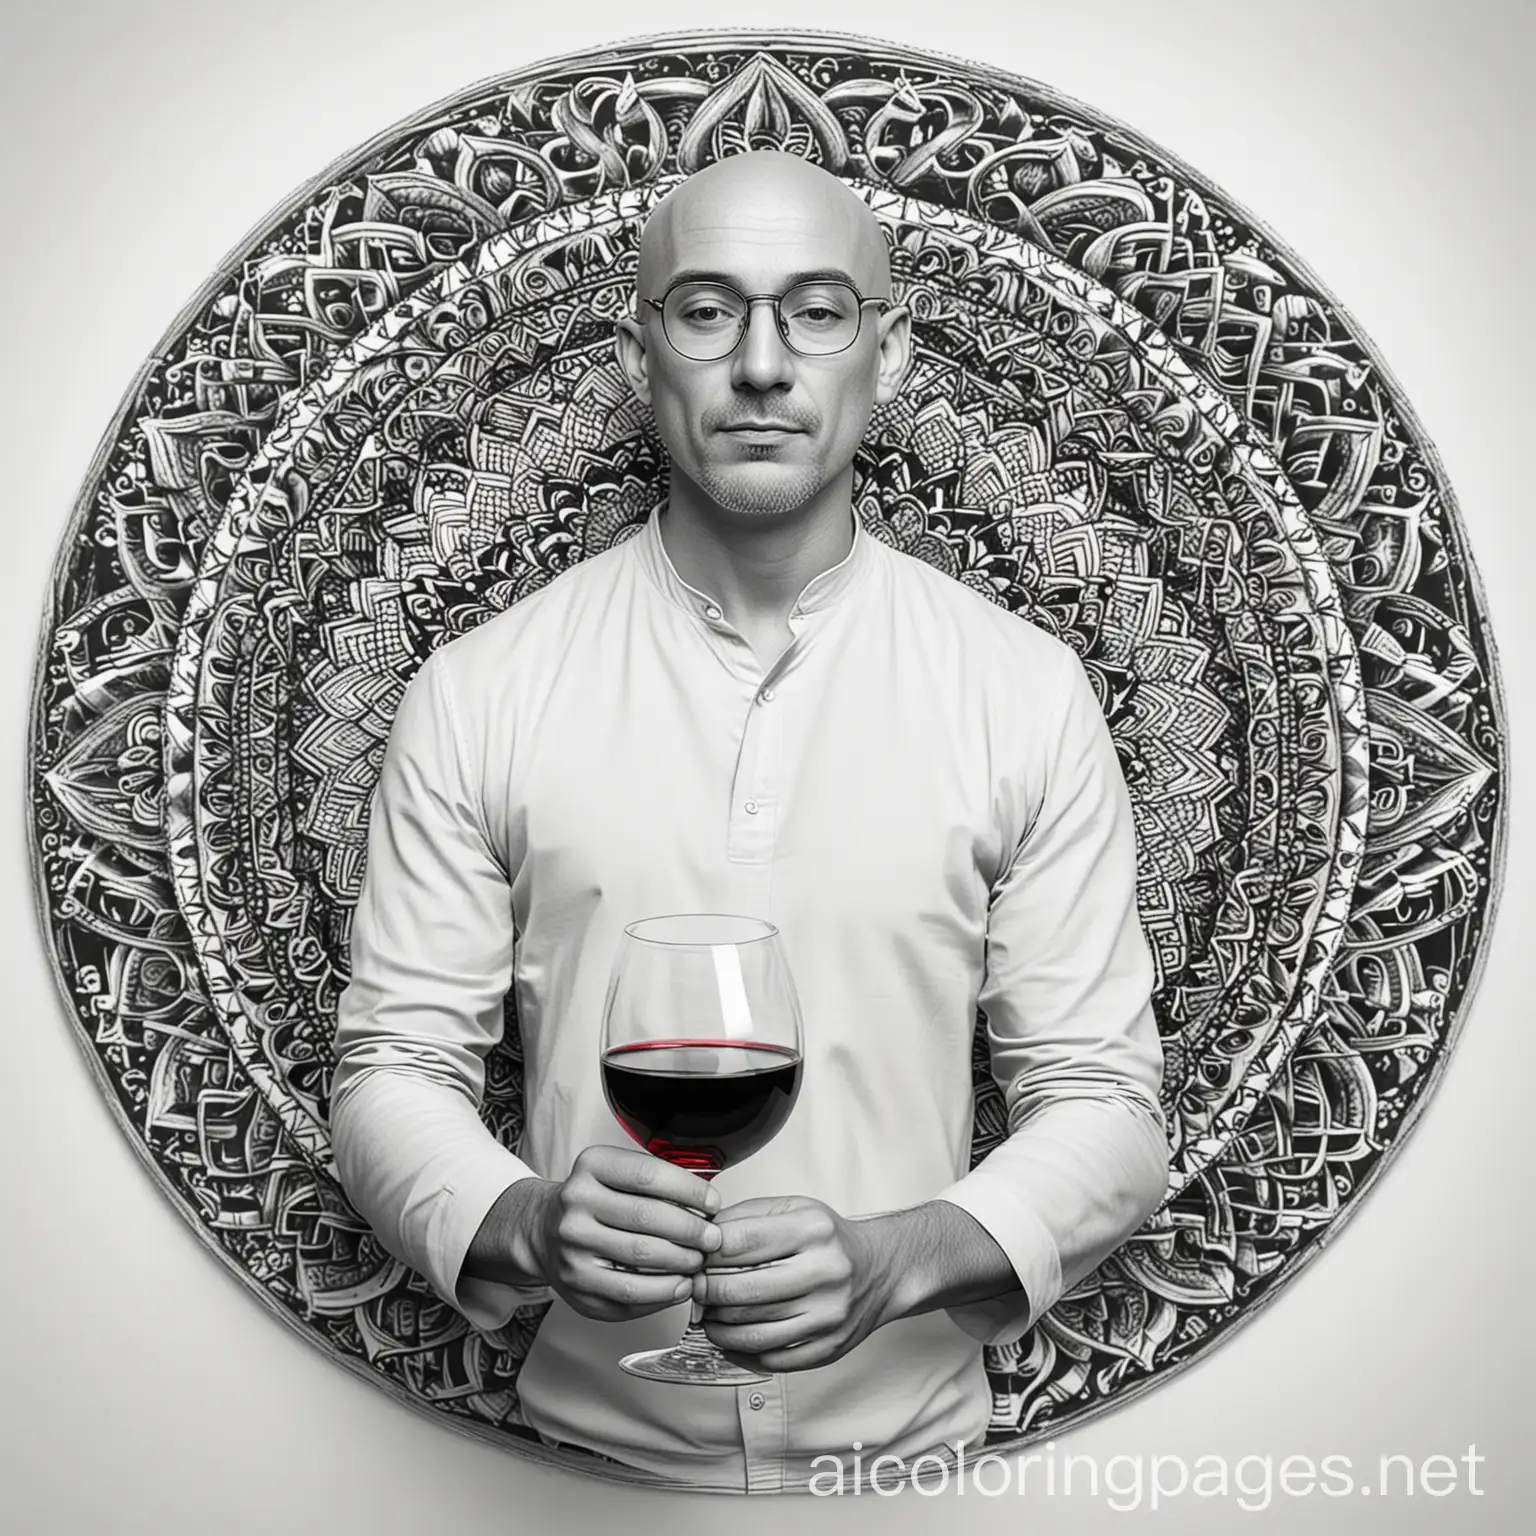 hombre calvo sin lentes con su copa llena de vino tinto sin color mandala para colorear
, Coloring Page, black and white, line art, white background, Simplicity, Ample White Space. The background of the coloring page is plain white to make it easy for young children to color within the lines. The outlines of all the subjects are easy to distinguish, making it simple for kids to color without too much difficulty